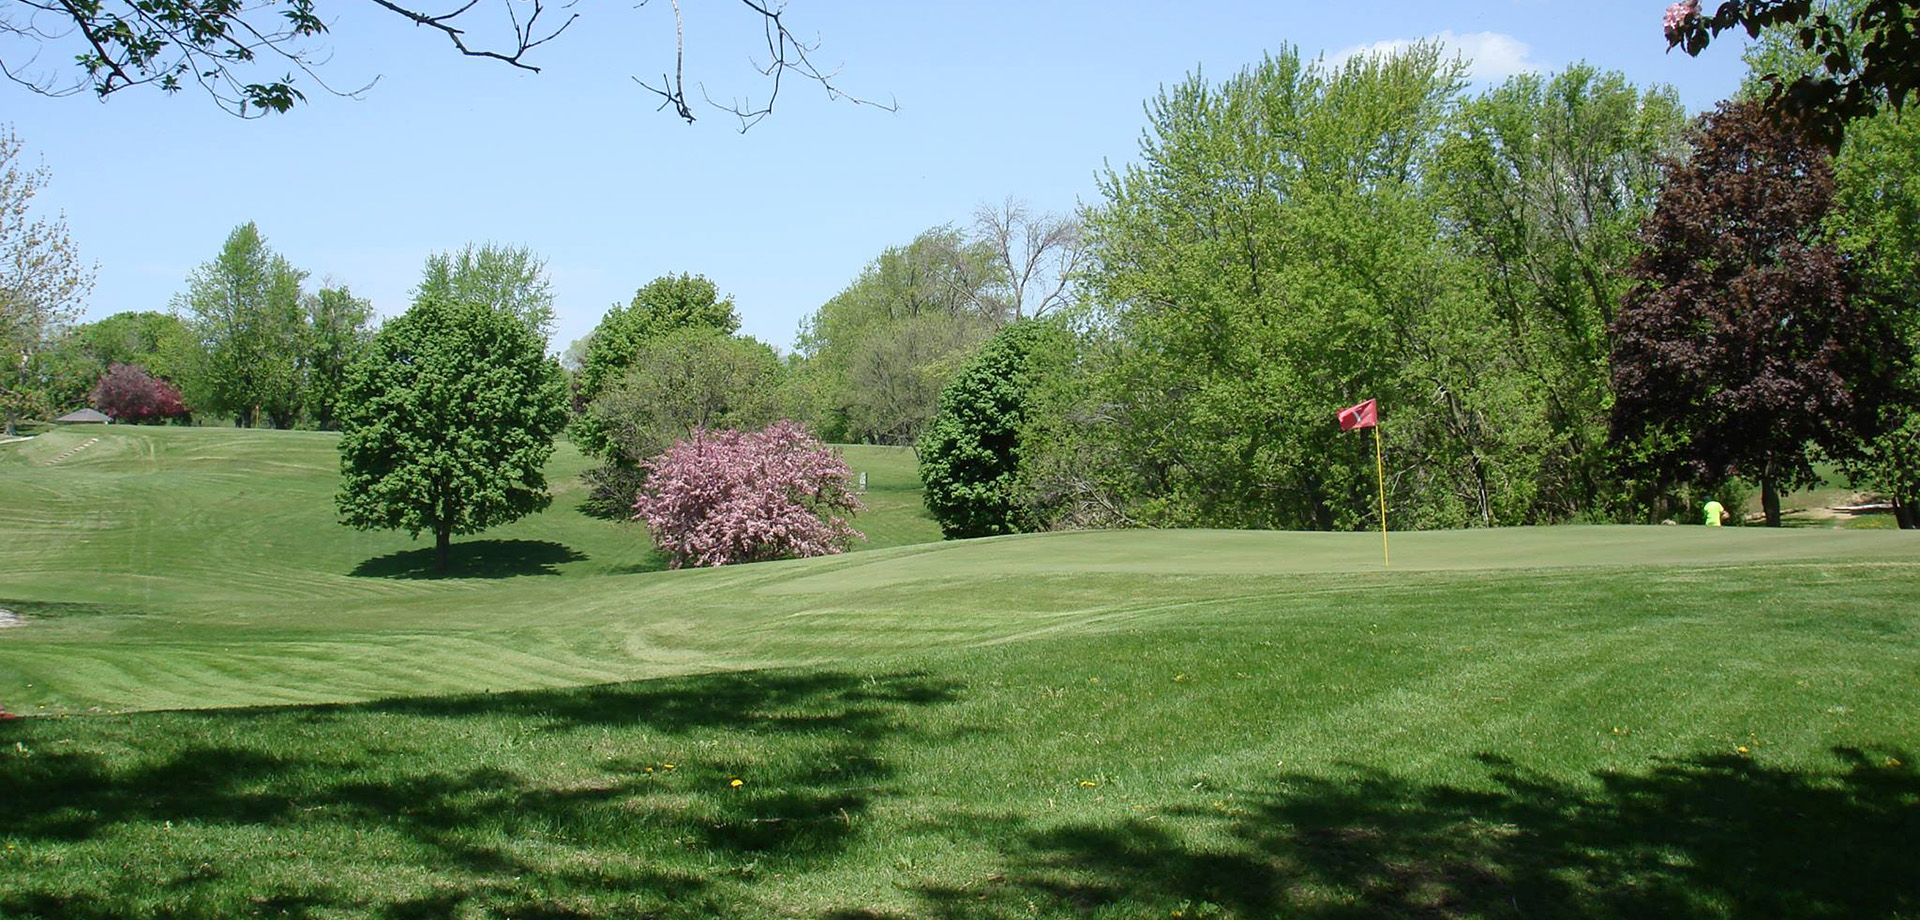 Course hole with trees in background on sloping greens